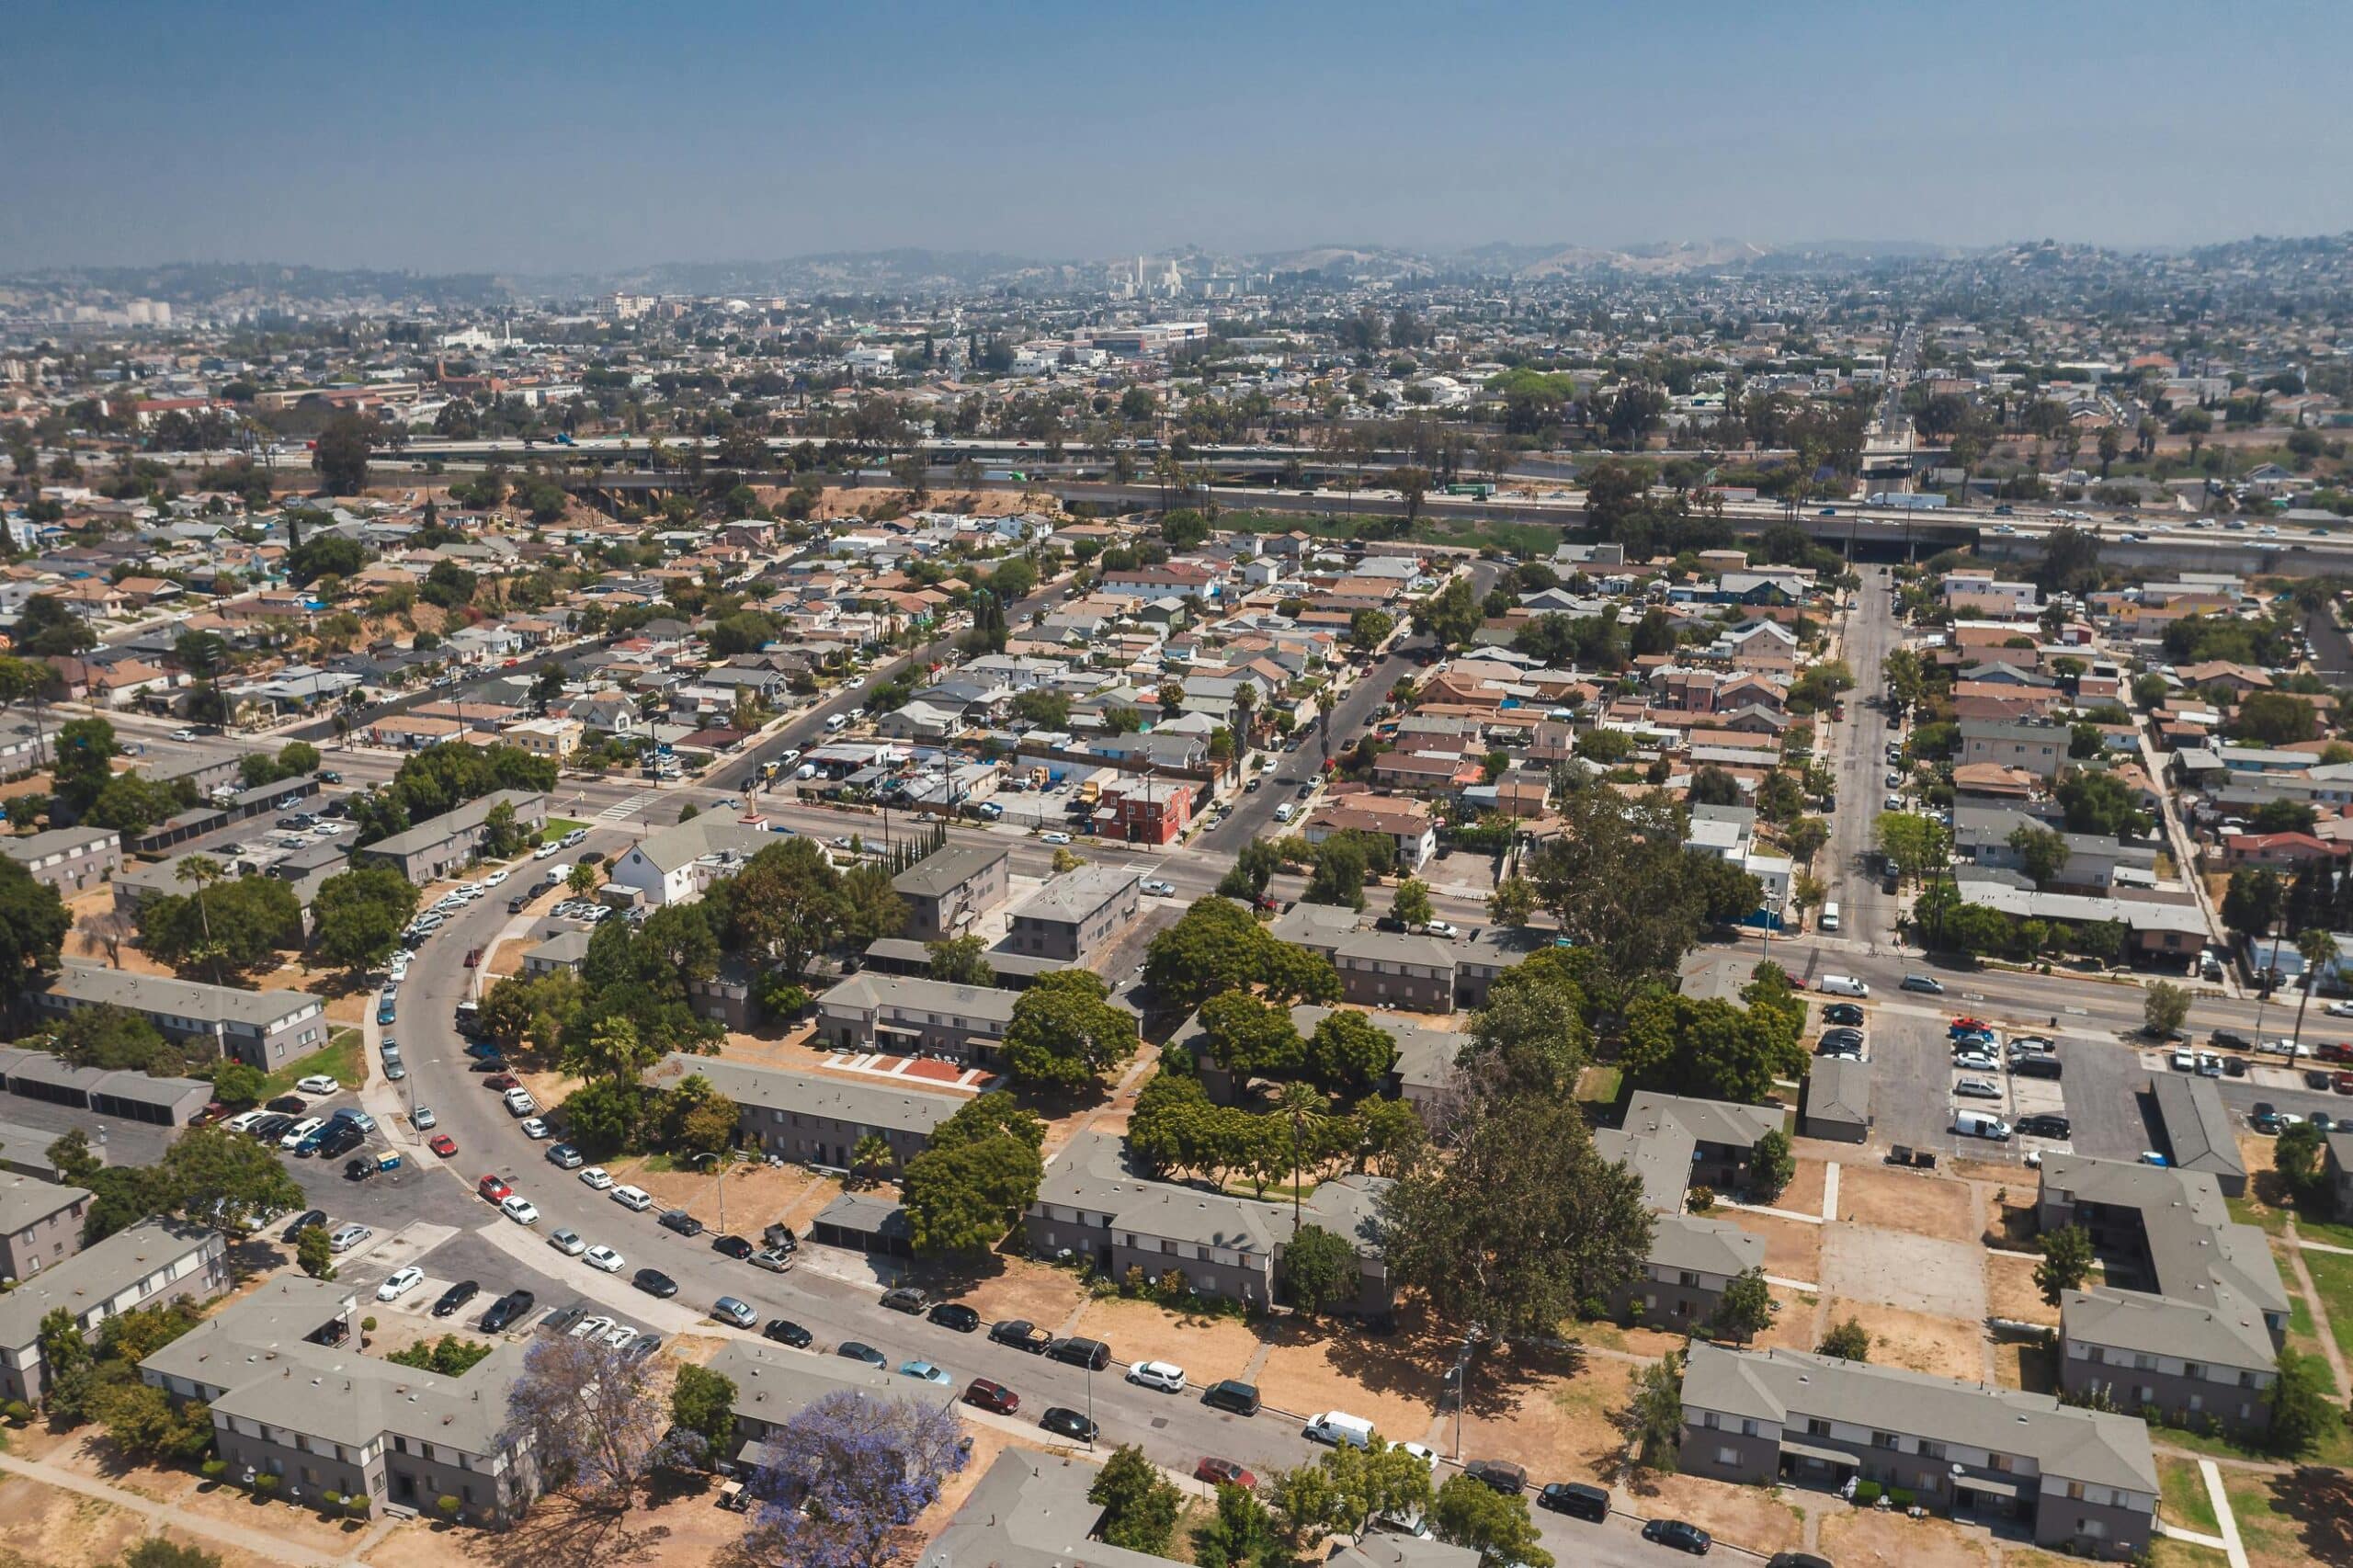 Mastering Supplier Diversity Compliance for California’s Affordable Housing Developers (AB 2873)